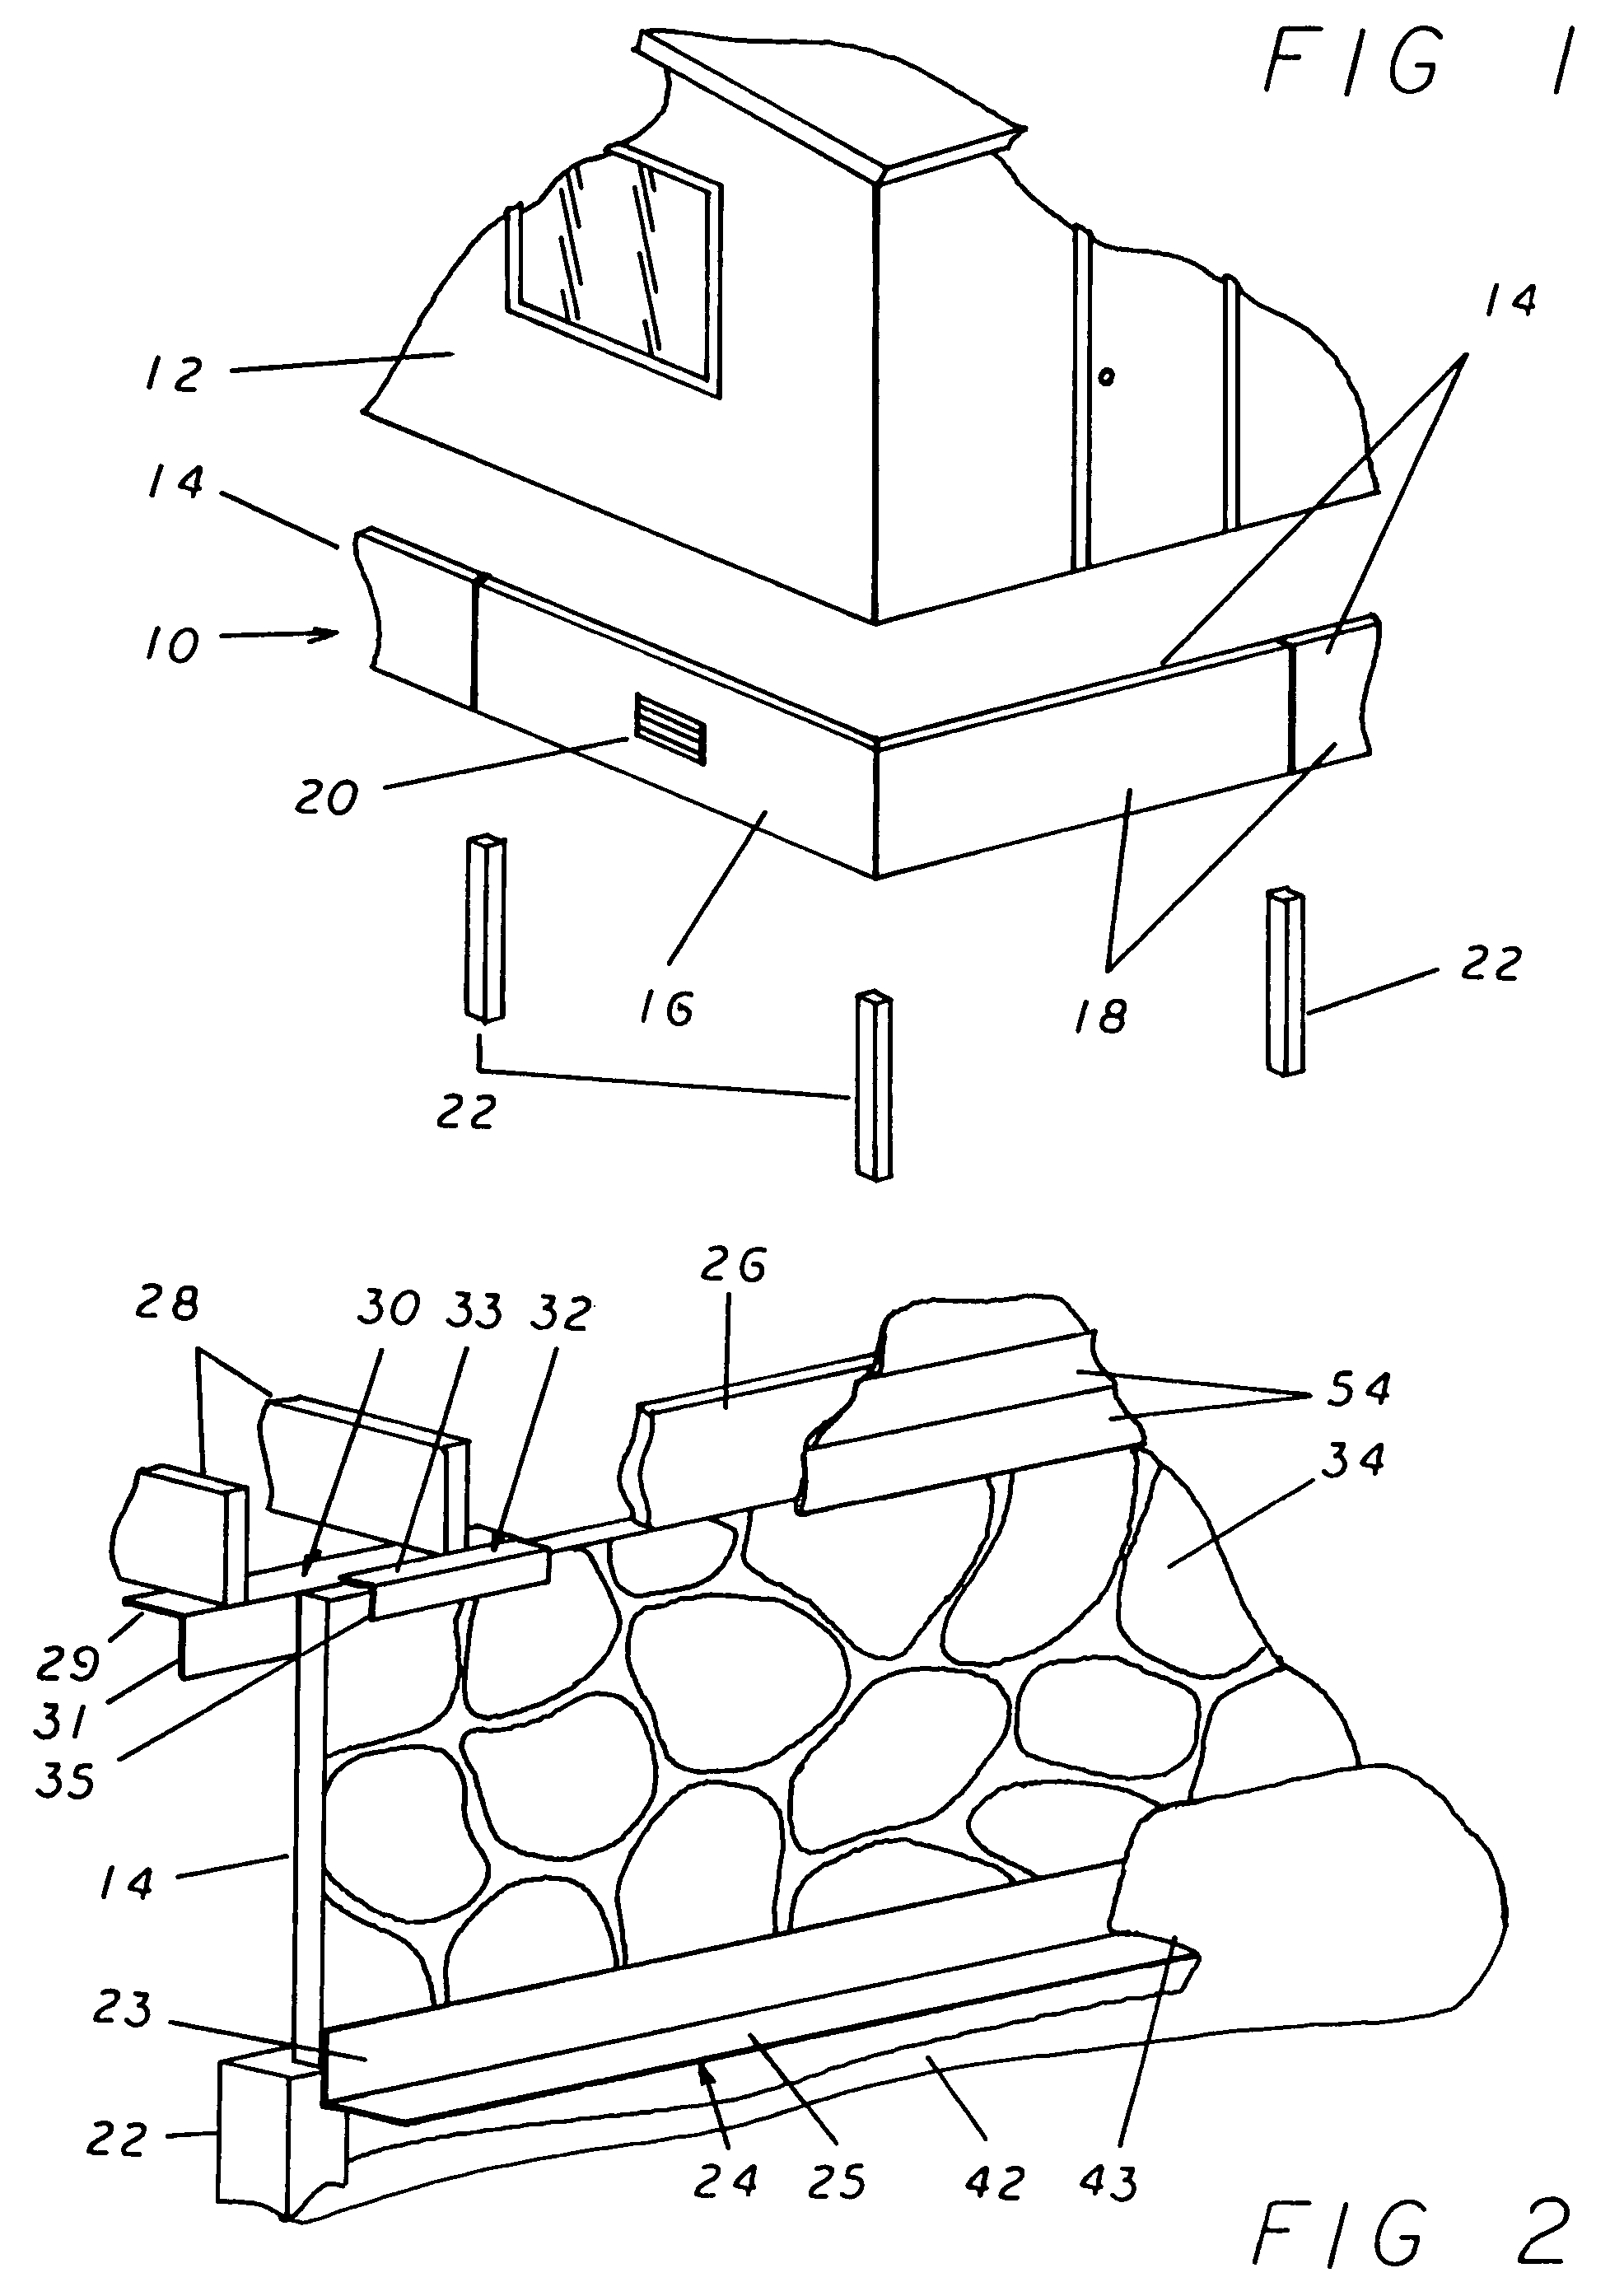 Foundation system for prefabricated houses